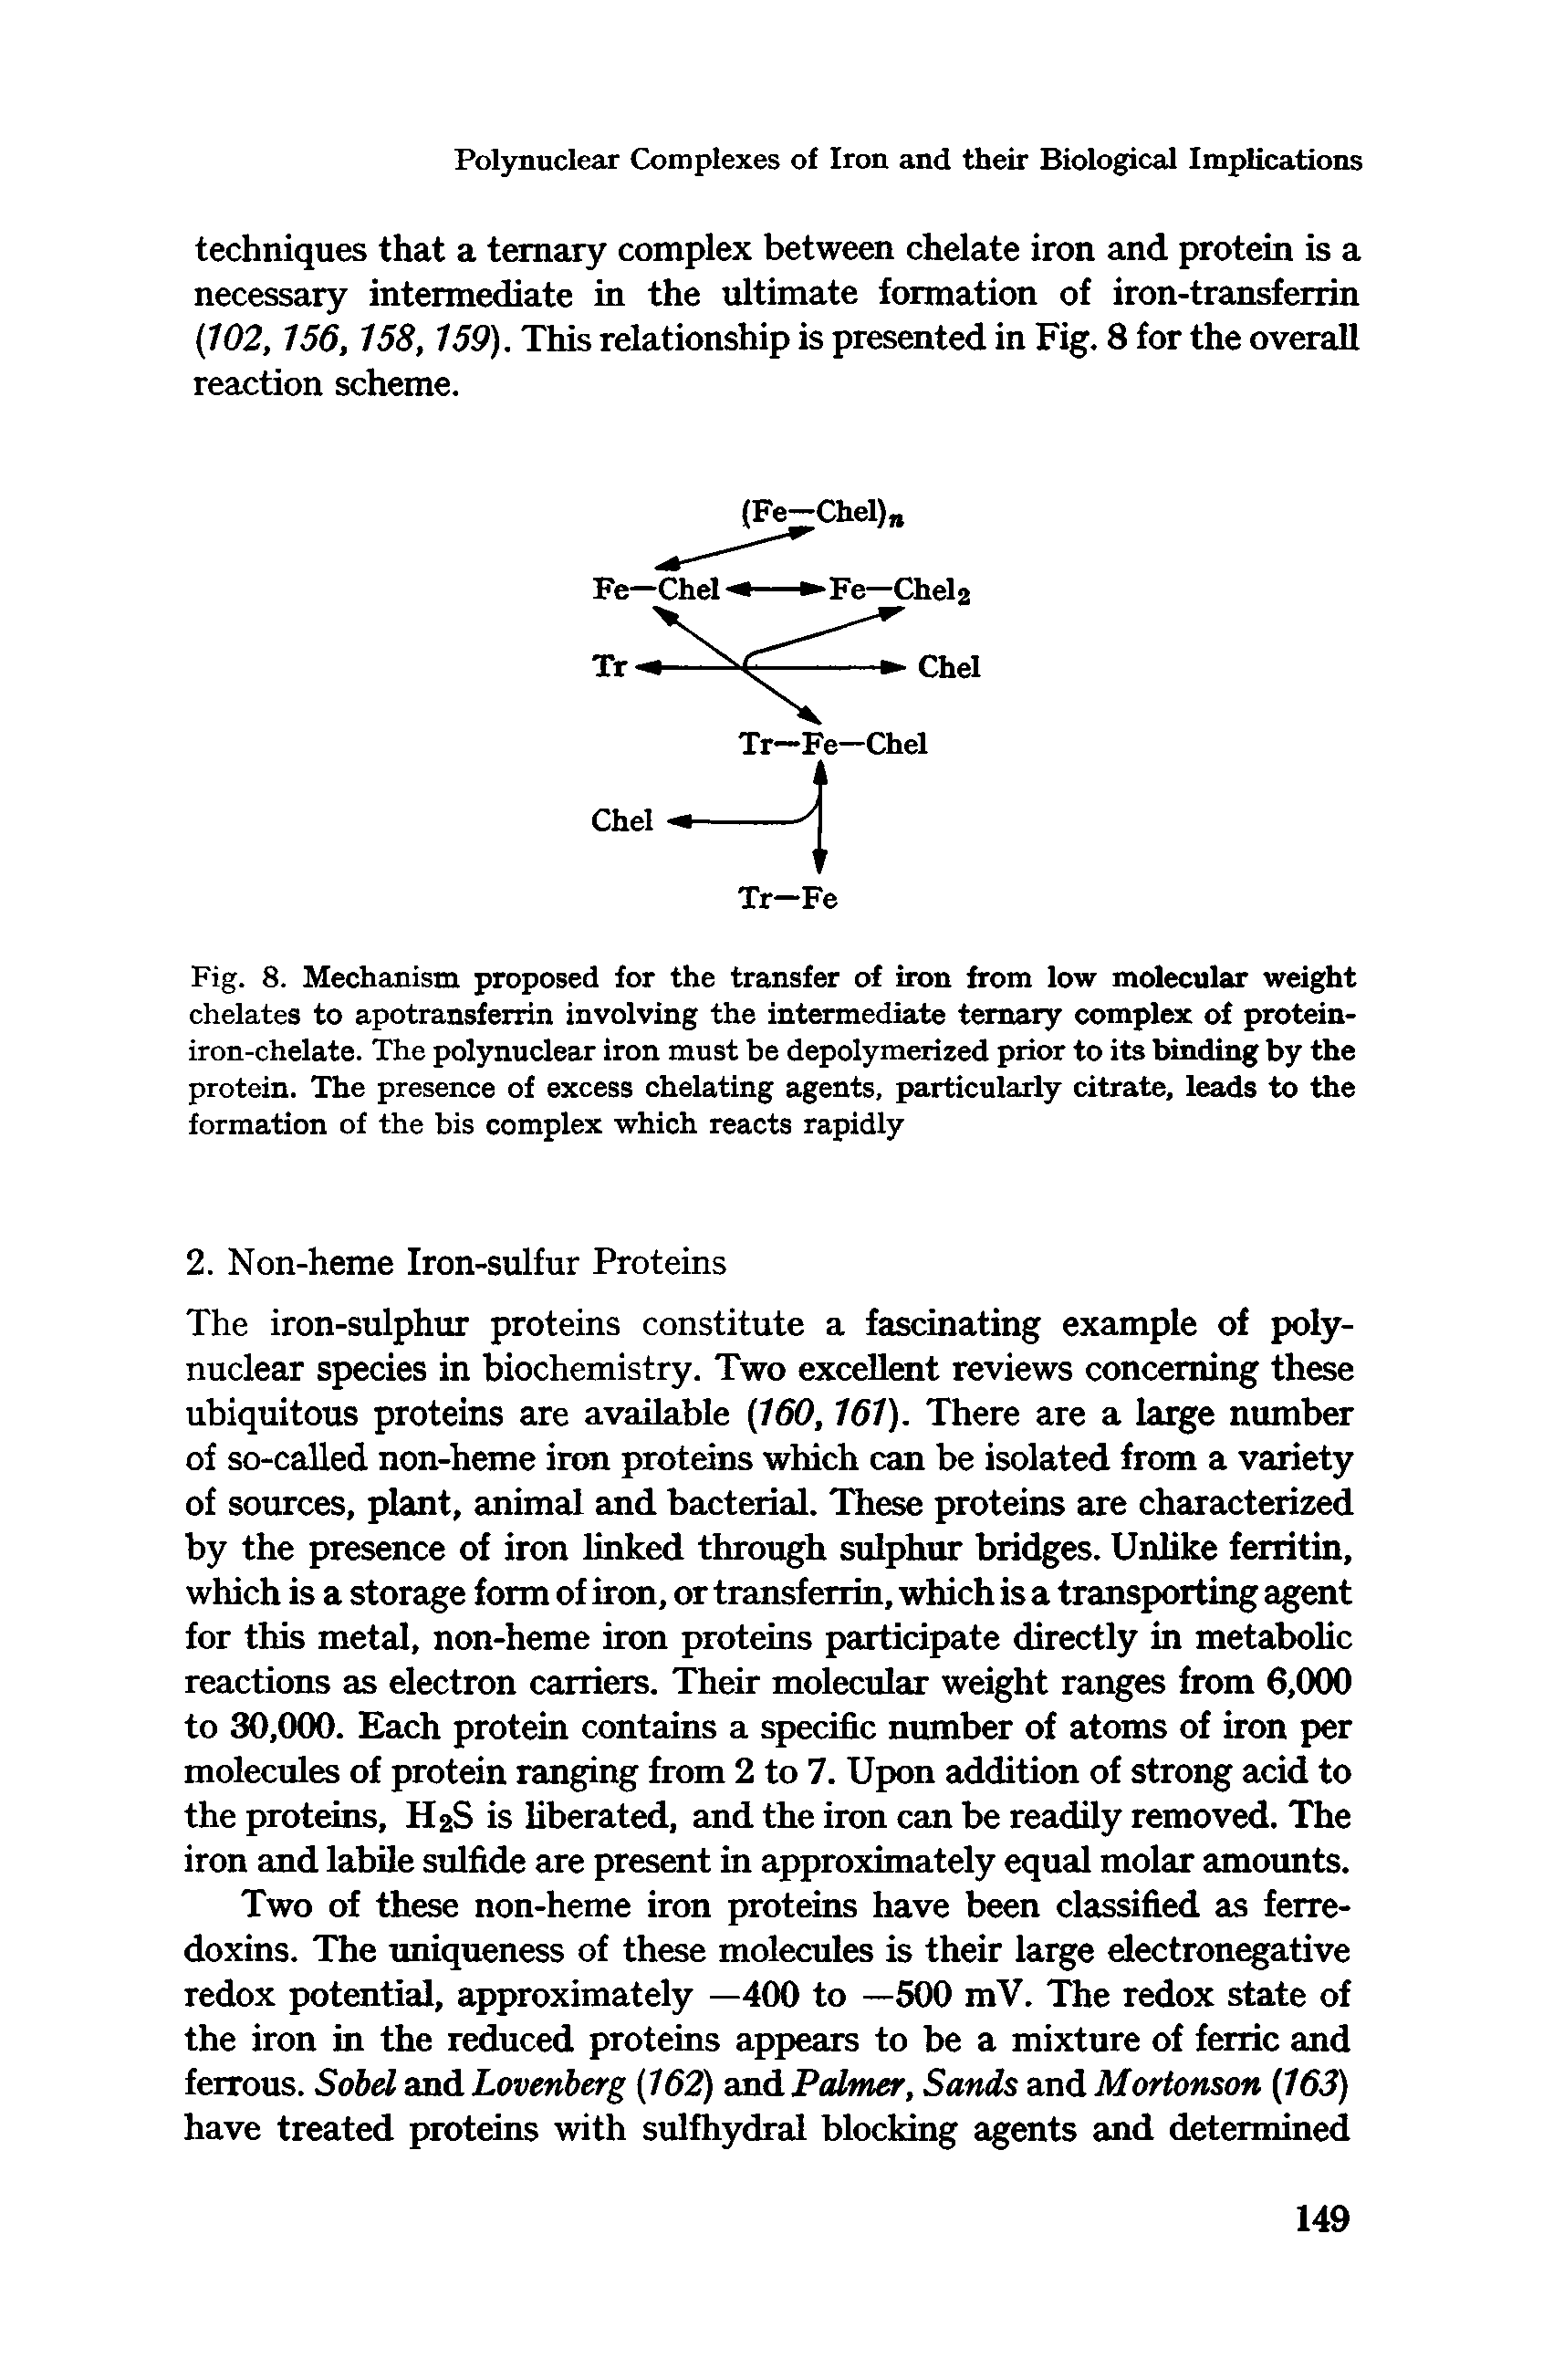 Fig. 8. Mechanism proposed for the transfer of iron from low molecular weight chelates to apotransferrin involving the intermediate ternary complex of protein-iron-chelate. The polynuclear iron must be depolymerized prior to its binding by the protein. The presence of excess chelating agents, particularly citrate, leads to the formation of the bis complex which reacts rapidly...